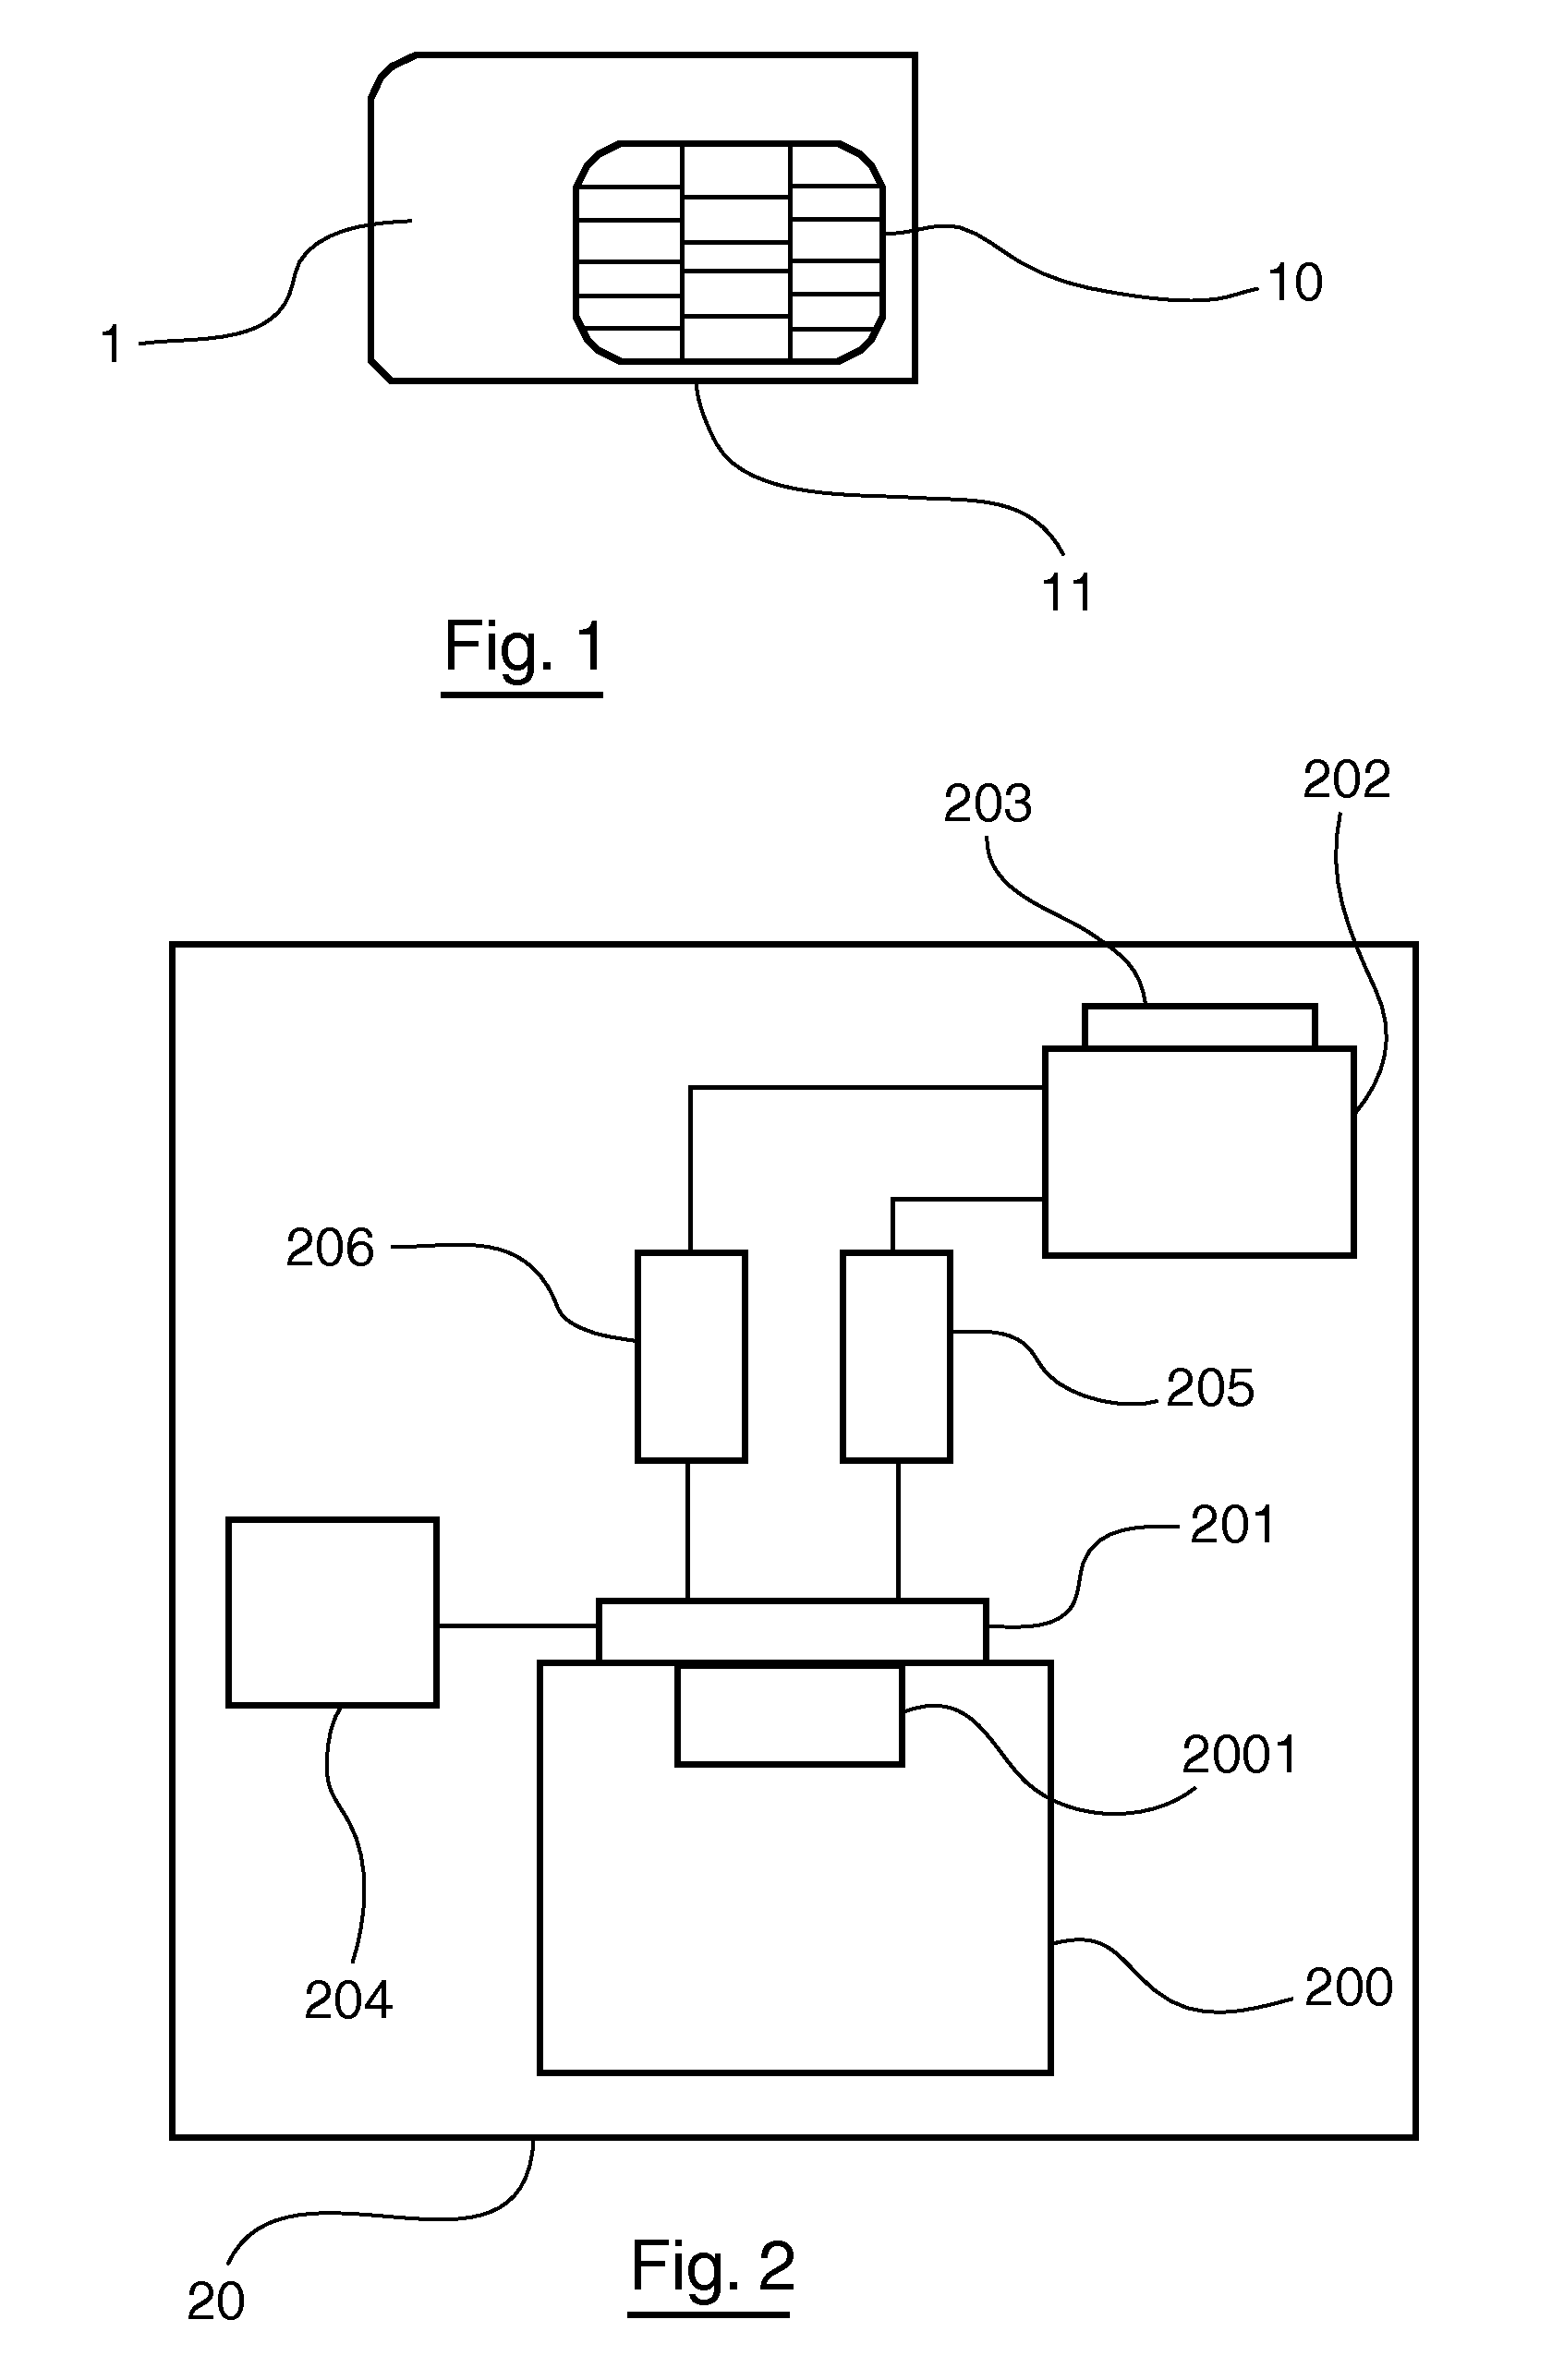 Radio communication device comprising at least one radio communication module and one sim card, corresponding radio communication module and sim card